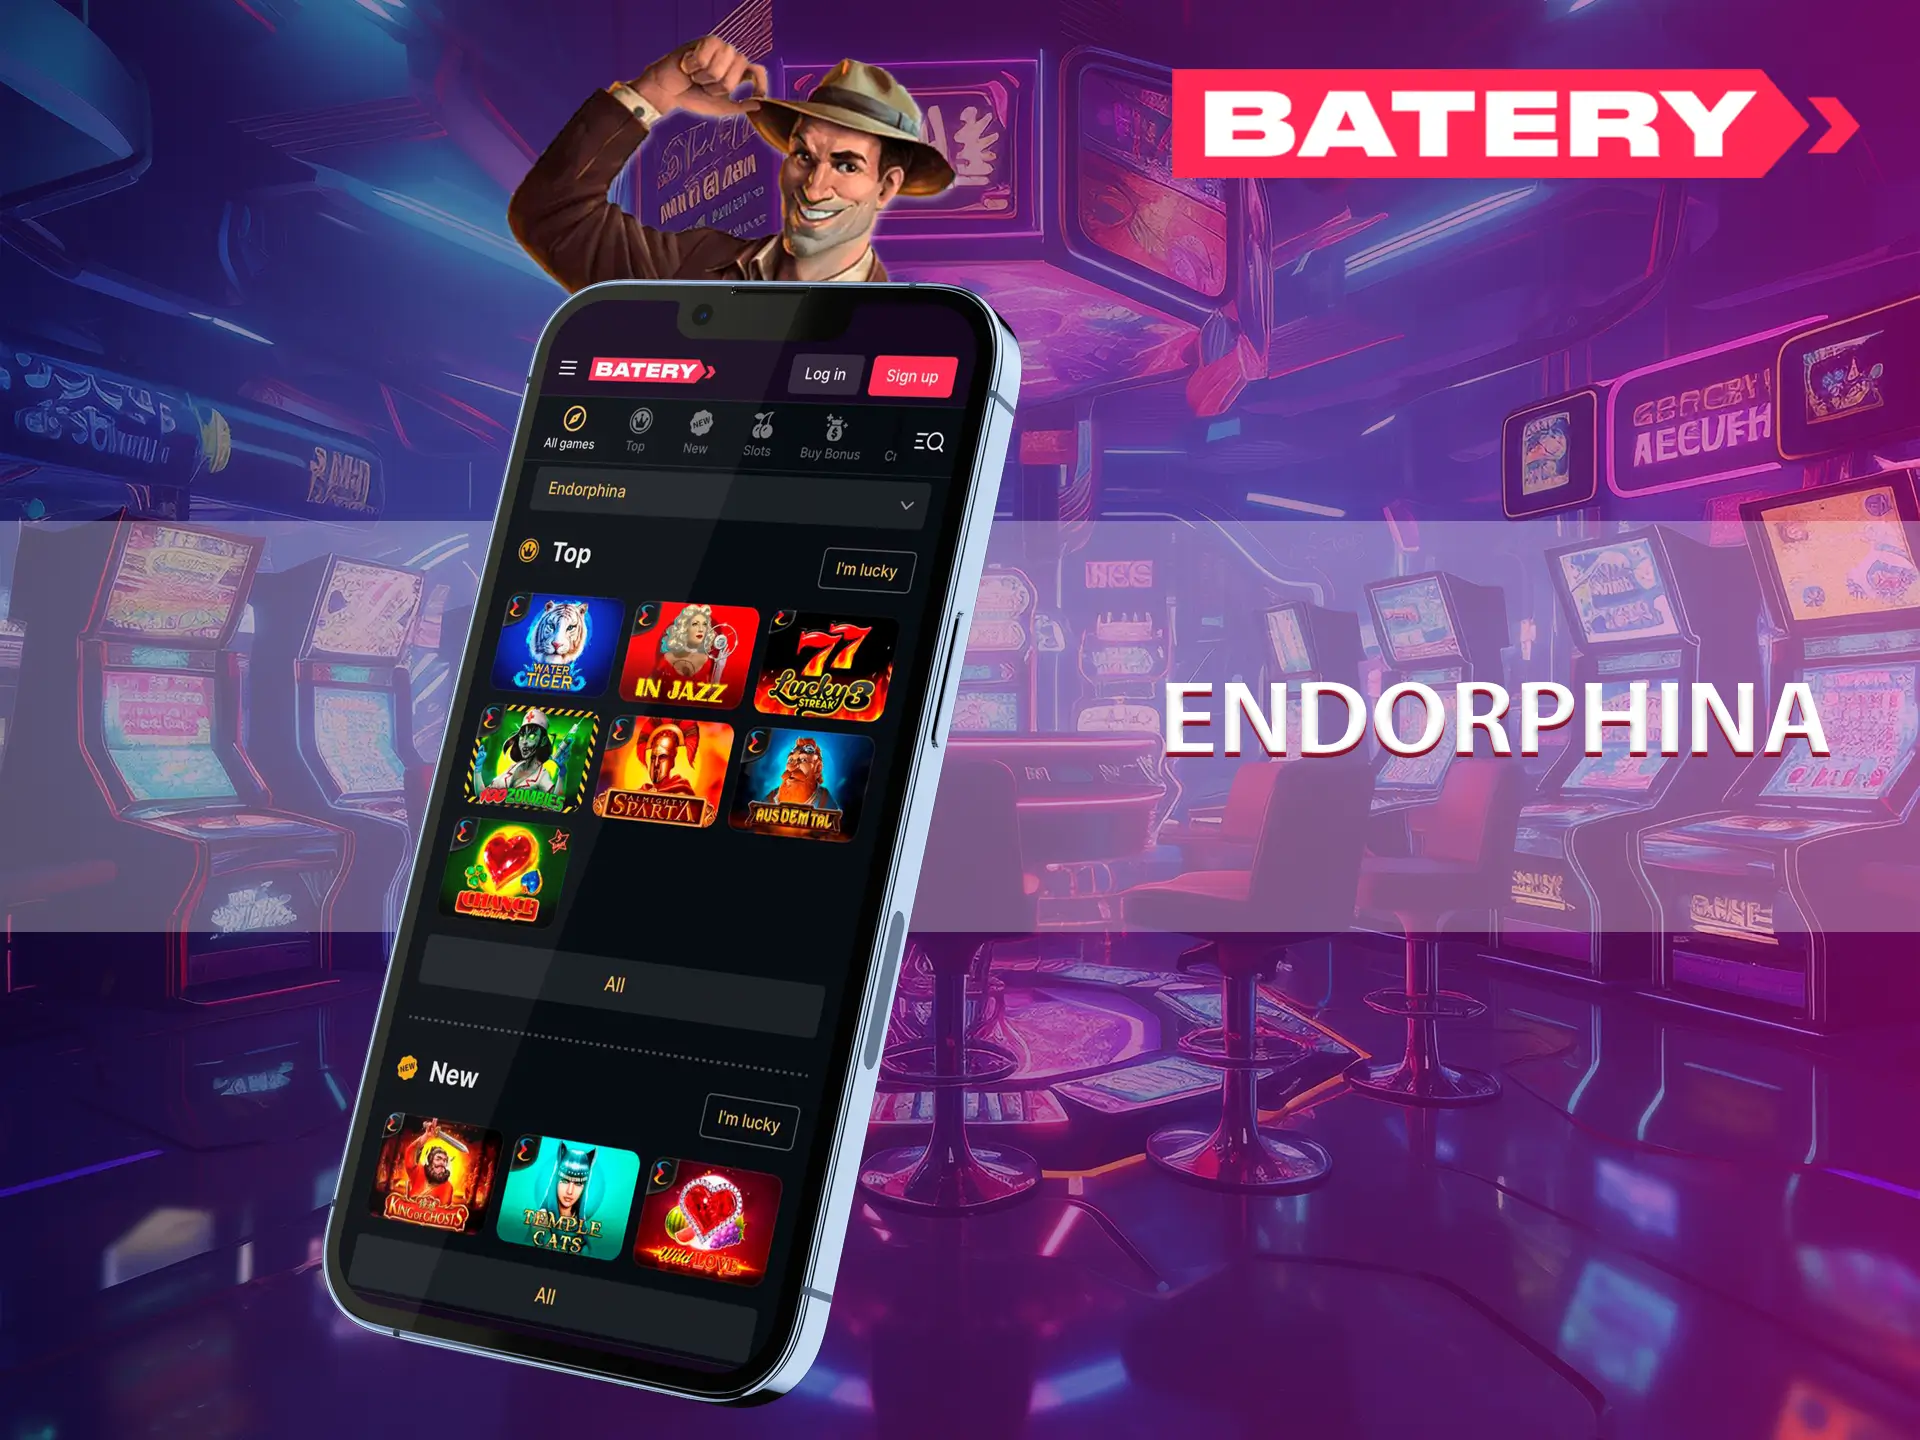 Endorphina offers players a lot of games in which you will not be bored.